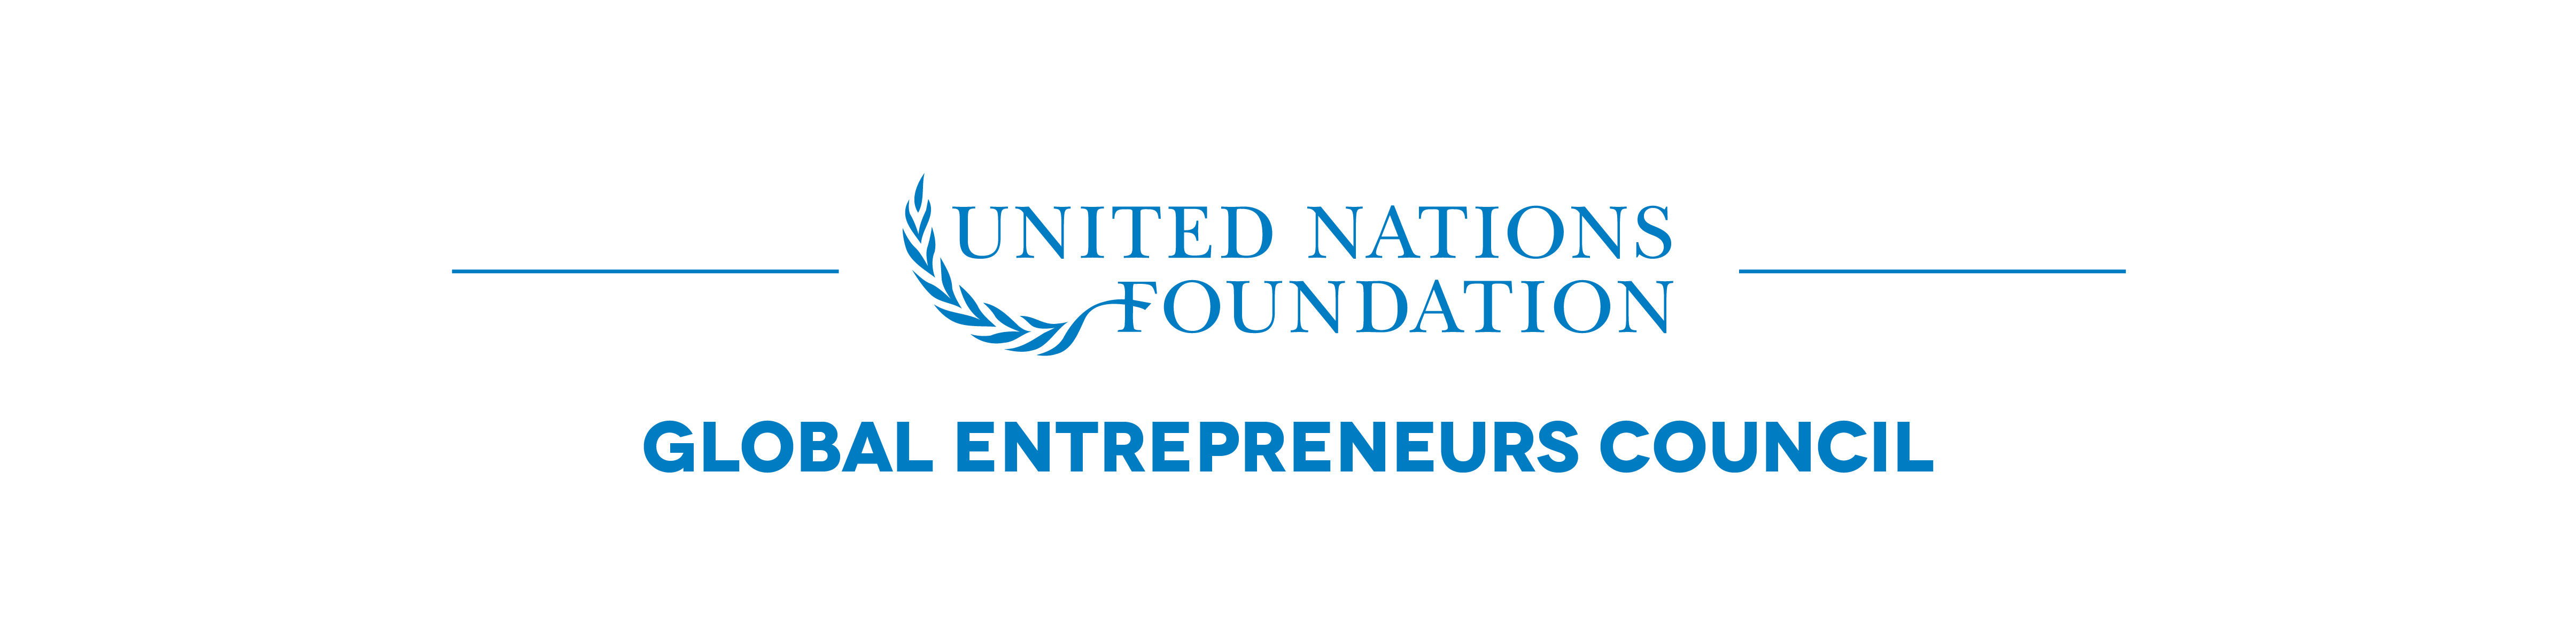 United Nations Foundation Logo - Charitybuzz: The UN Foundation's Global Entrepreneurs Council